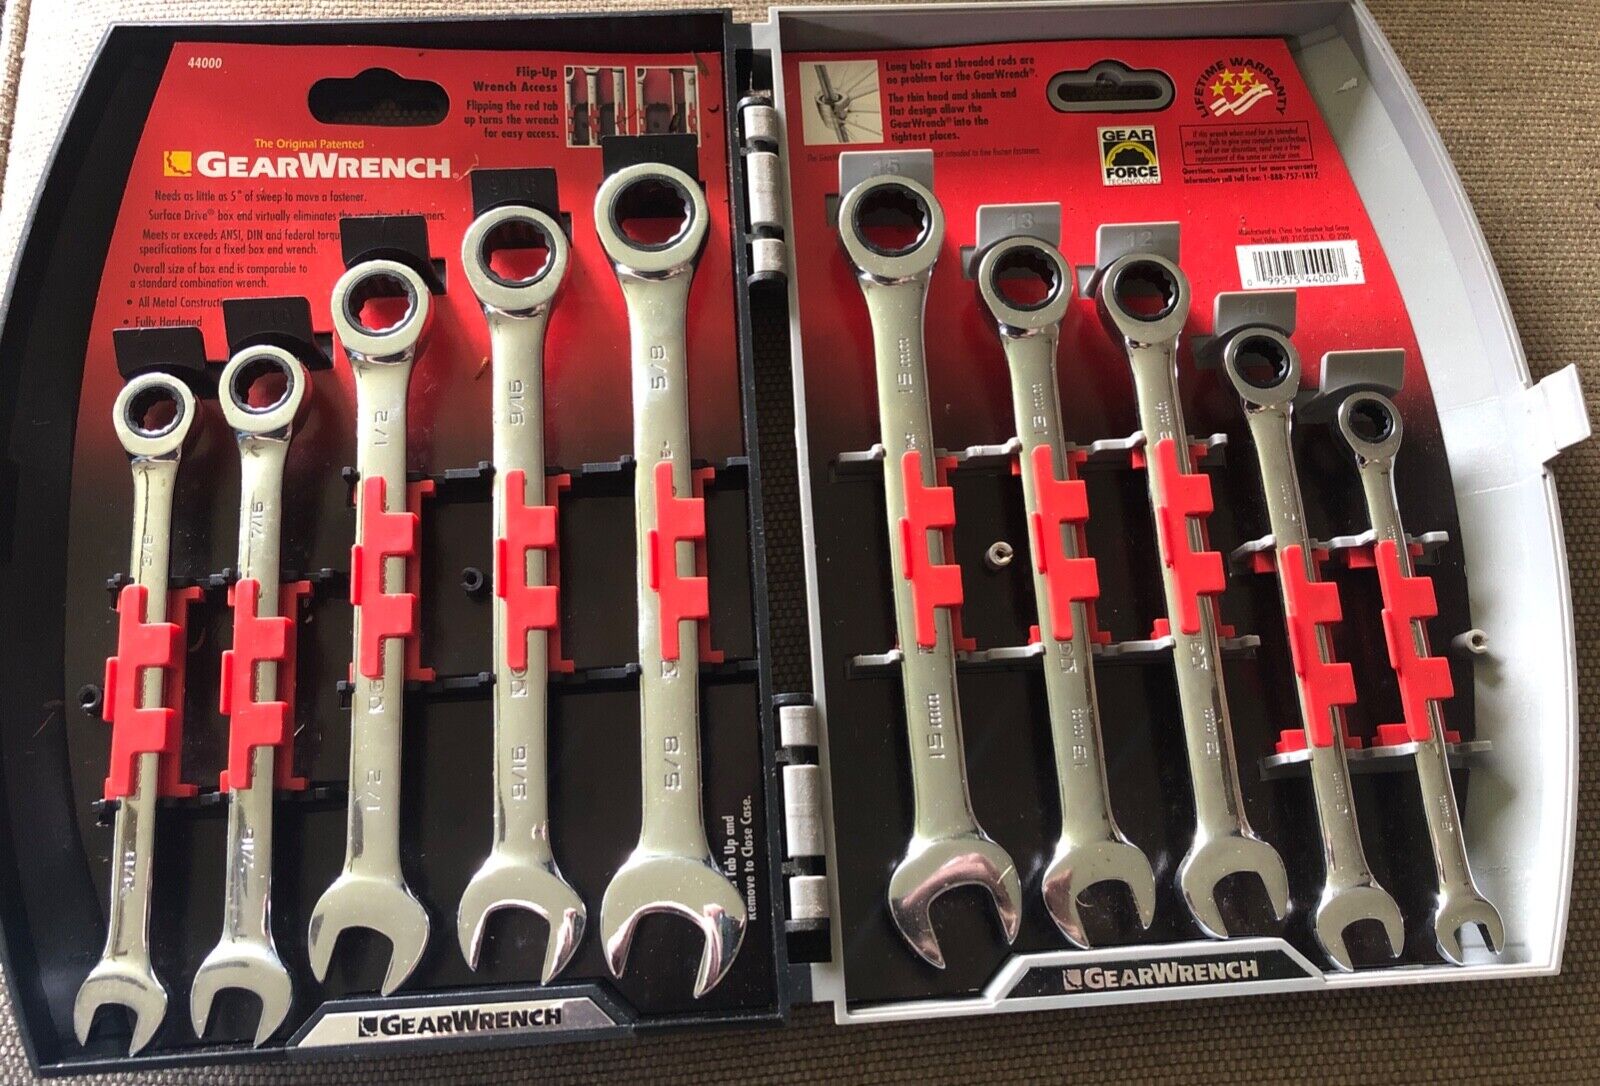 Gearwrench 10 Piece Metric/SAE Combination Ratcheting Wrench Set - 44000